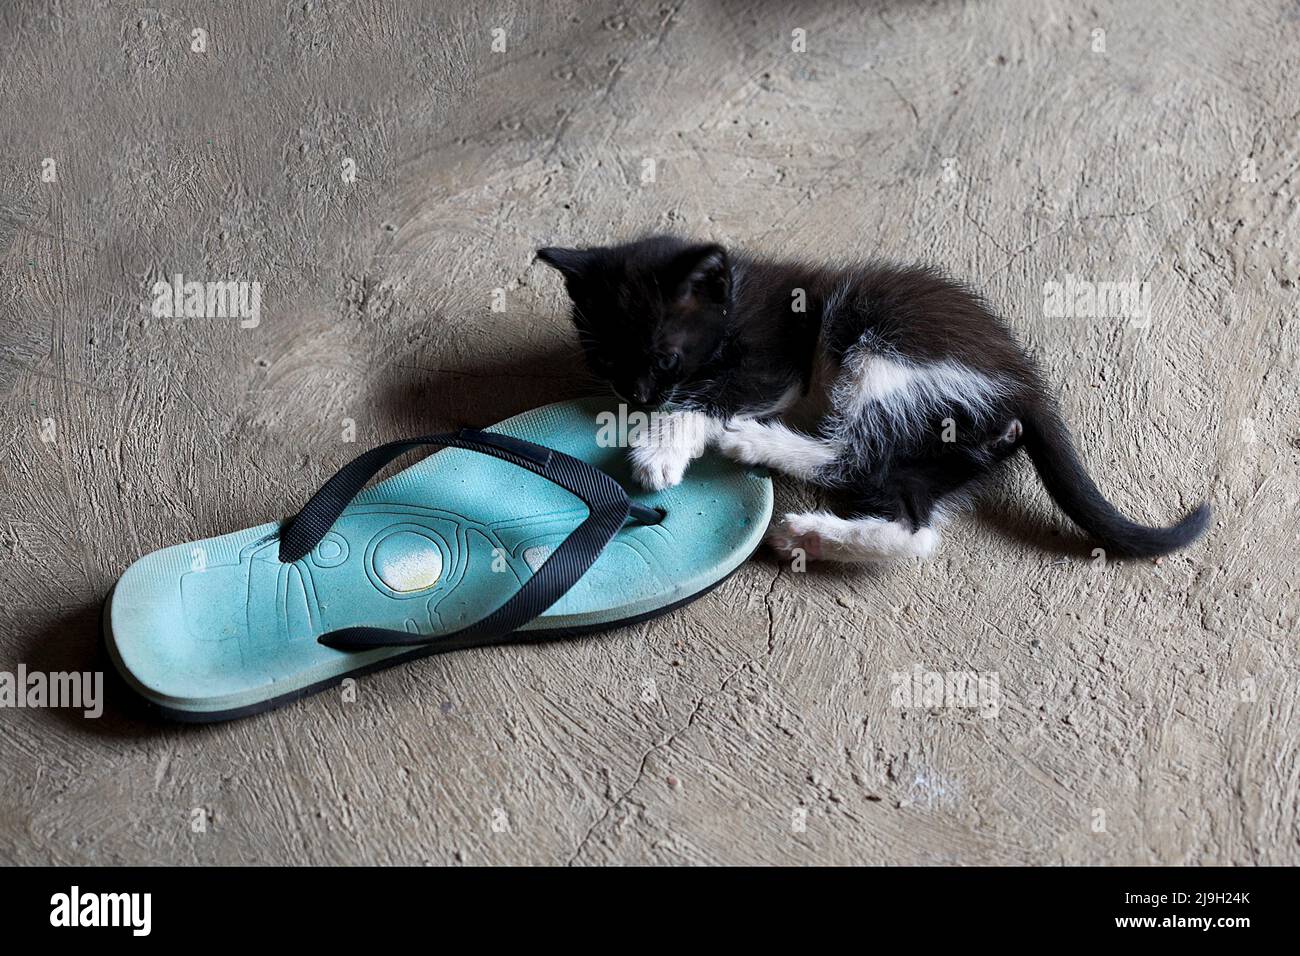 5 week-old kitten playing with flip-flop. Stock Photo